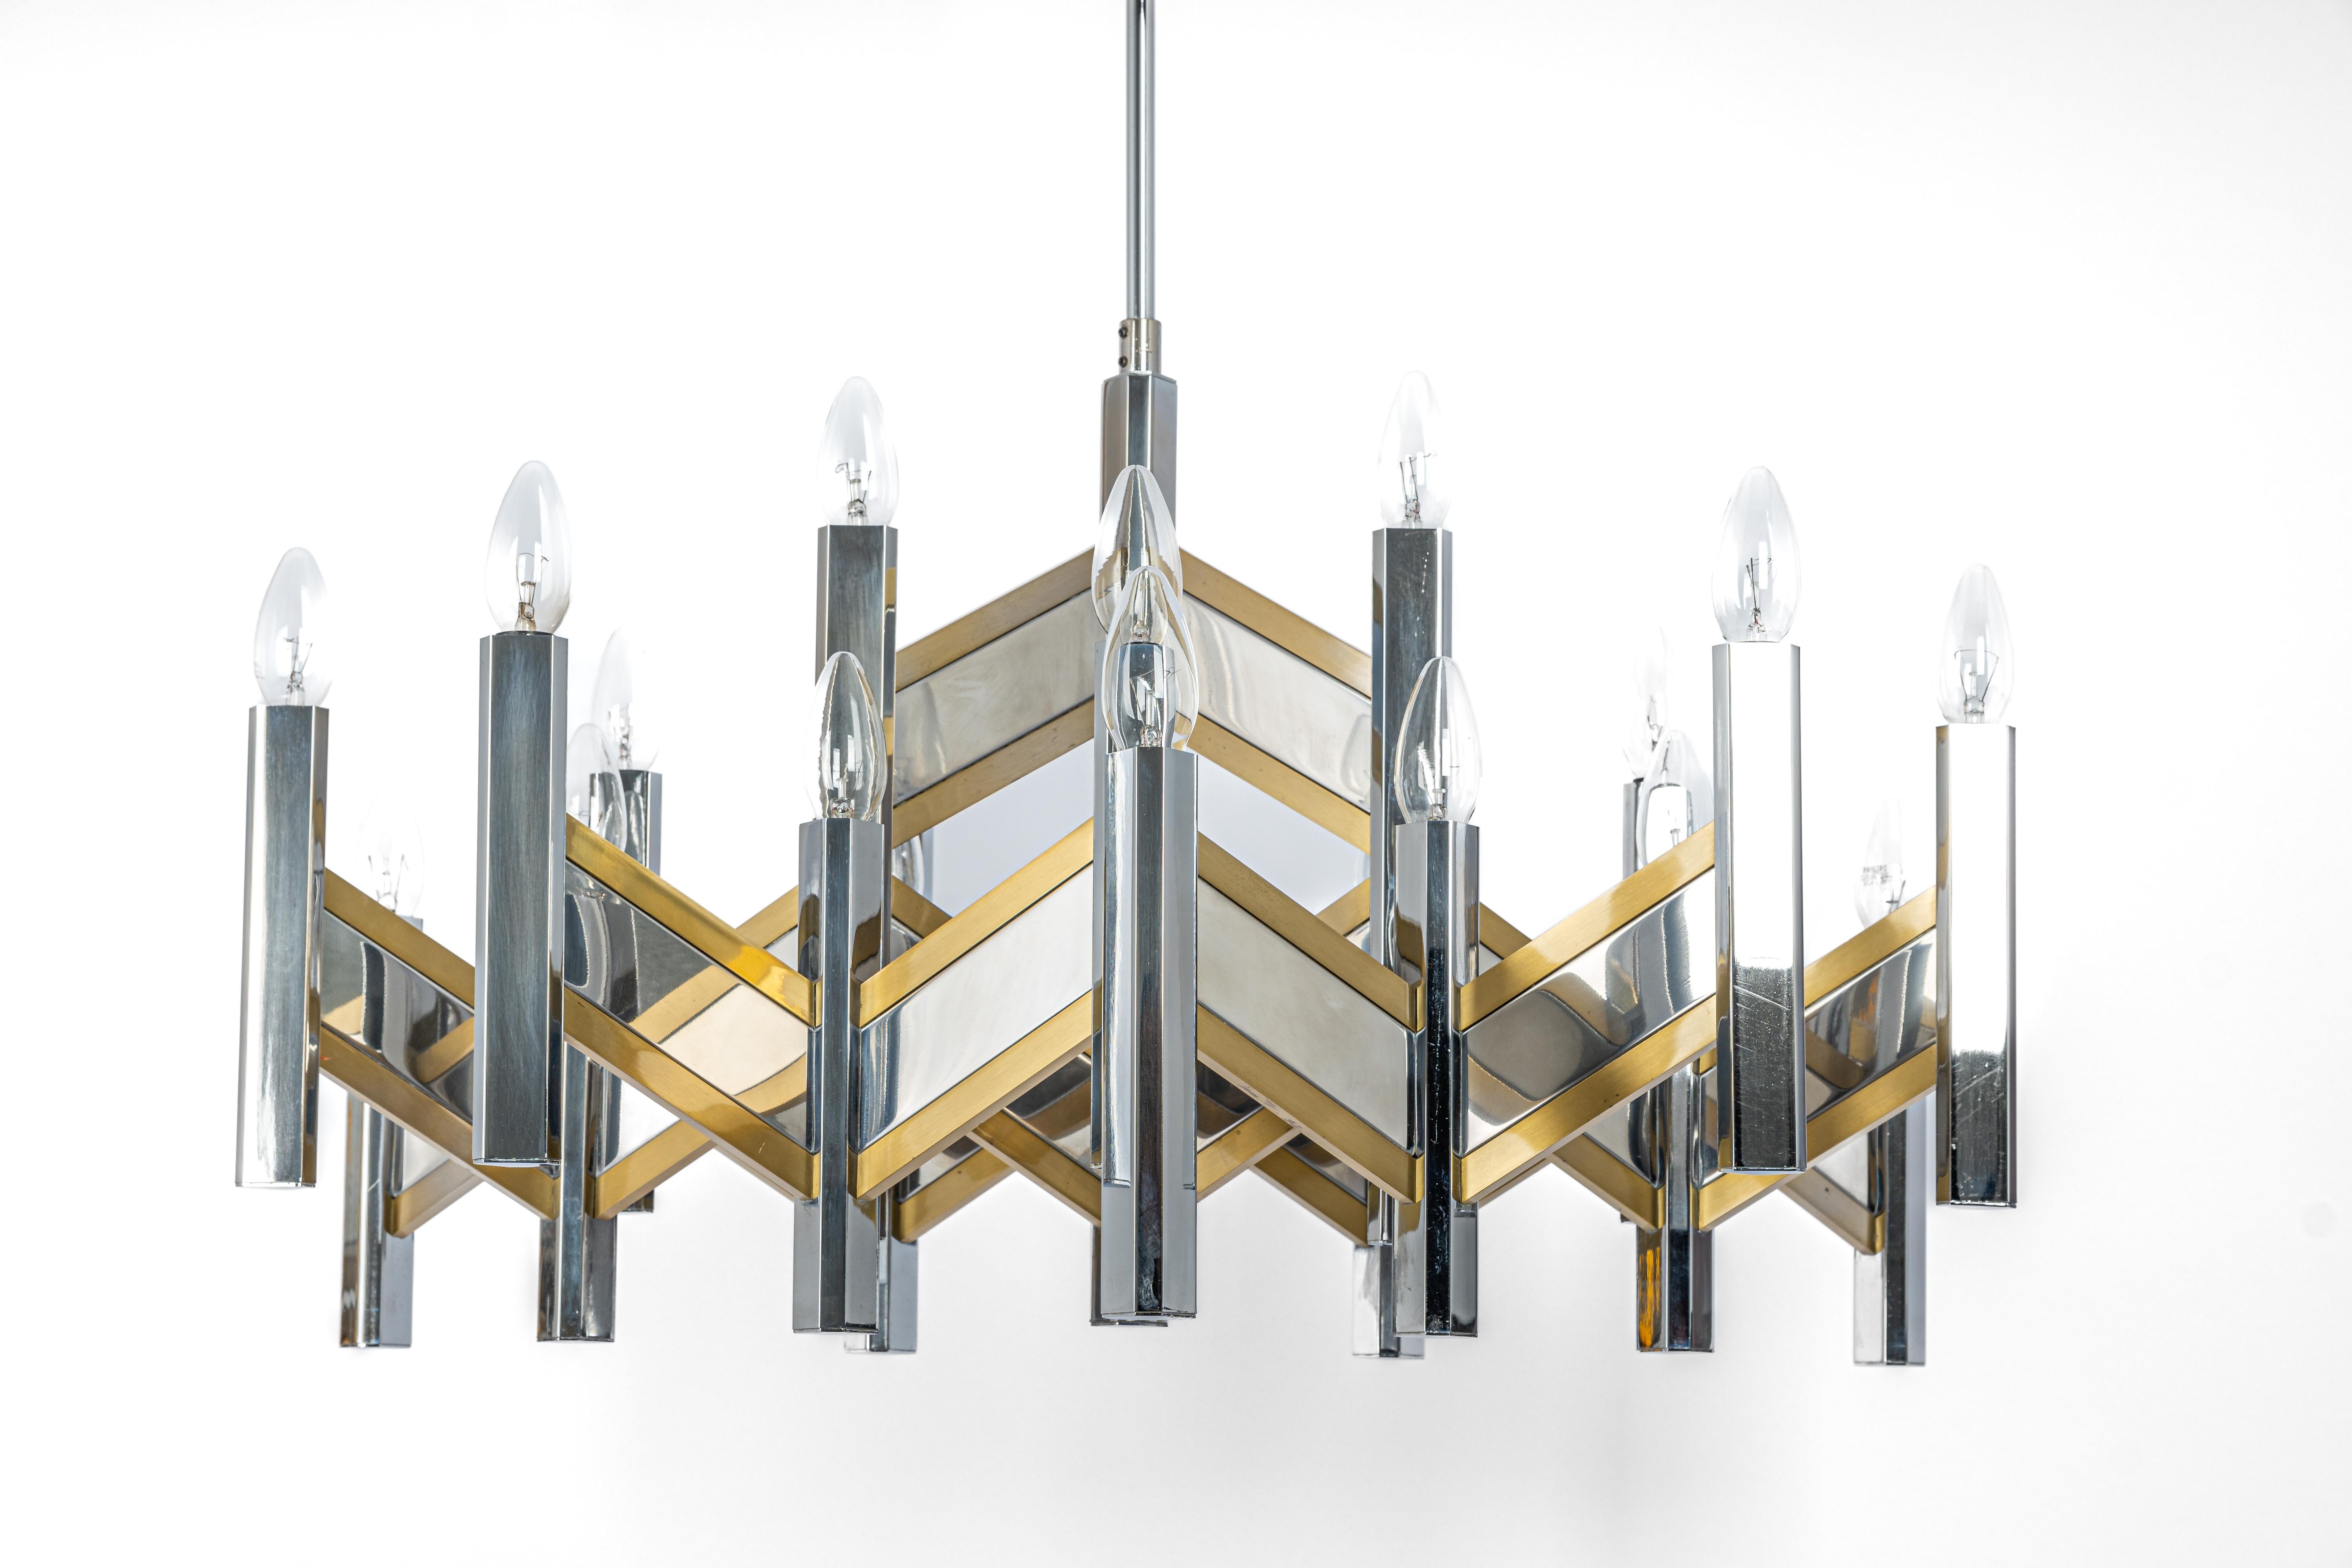 Stunning huge chandelier designed by Sciolari.
Brush brass and chrome
Best of the 1960s.
High quality and in very good condition. Cleaned, well-wired and ready to use. 

The fixture requires 21 x E14 standard bulbs with 40W max each.
Light